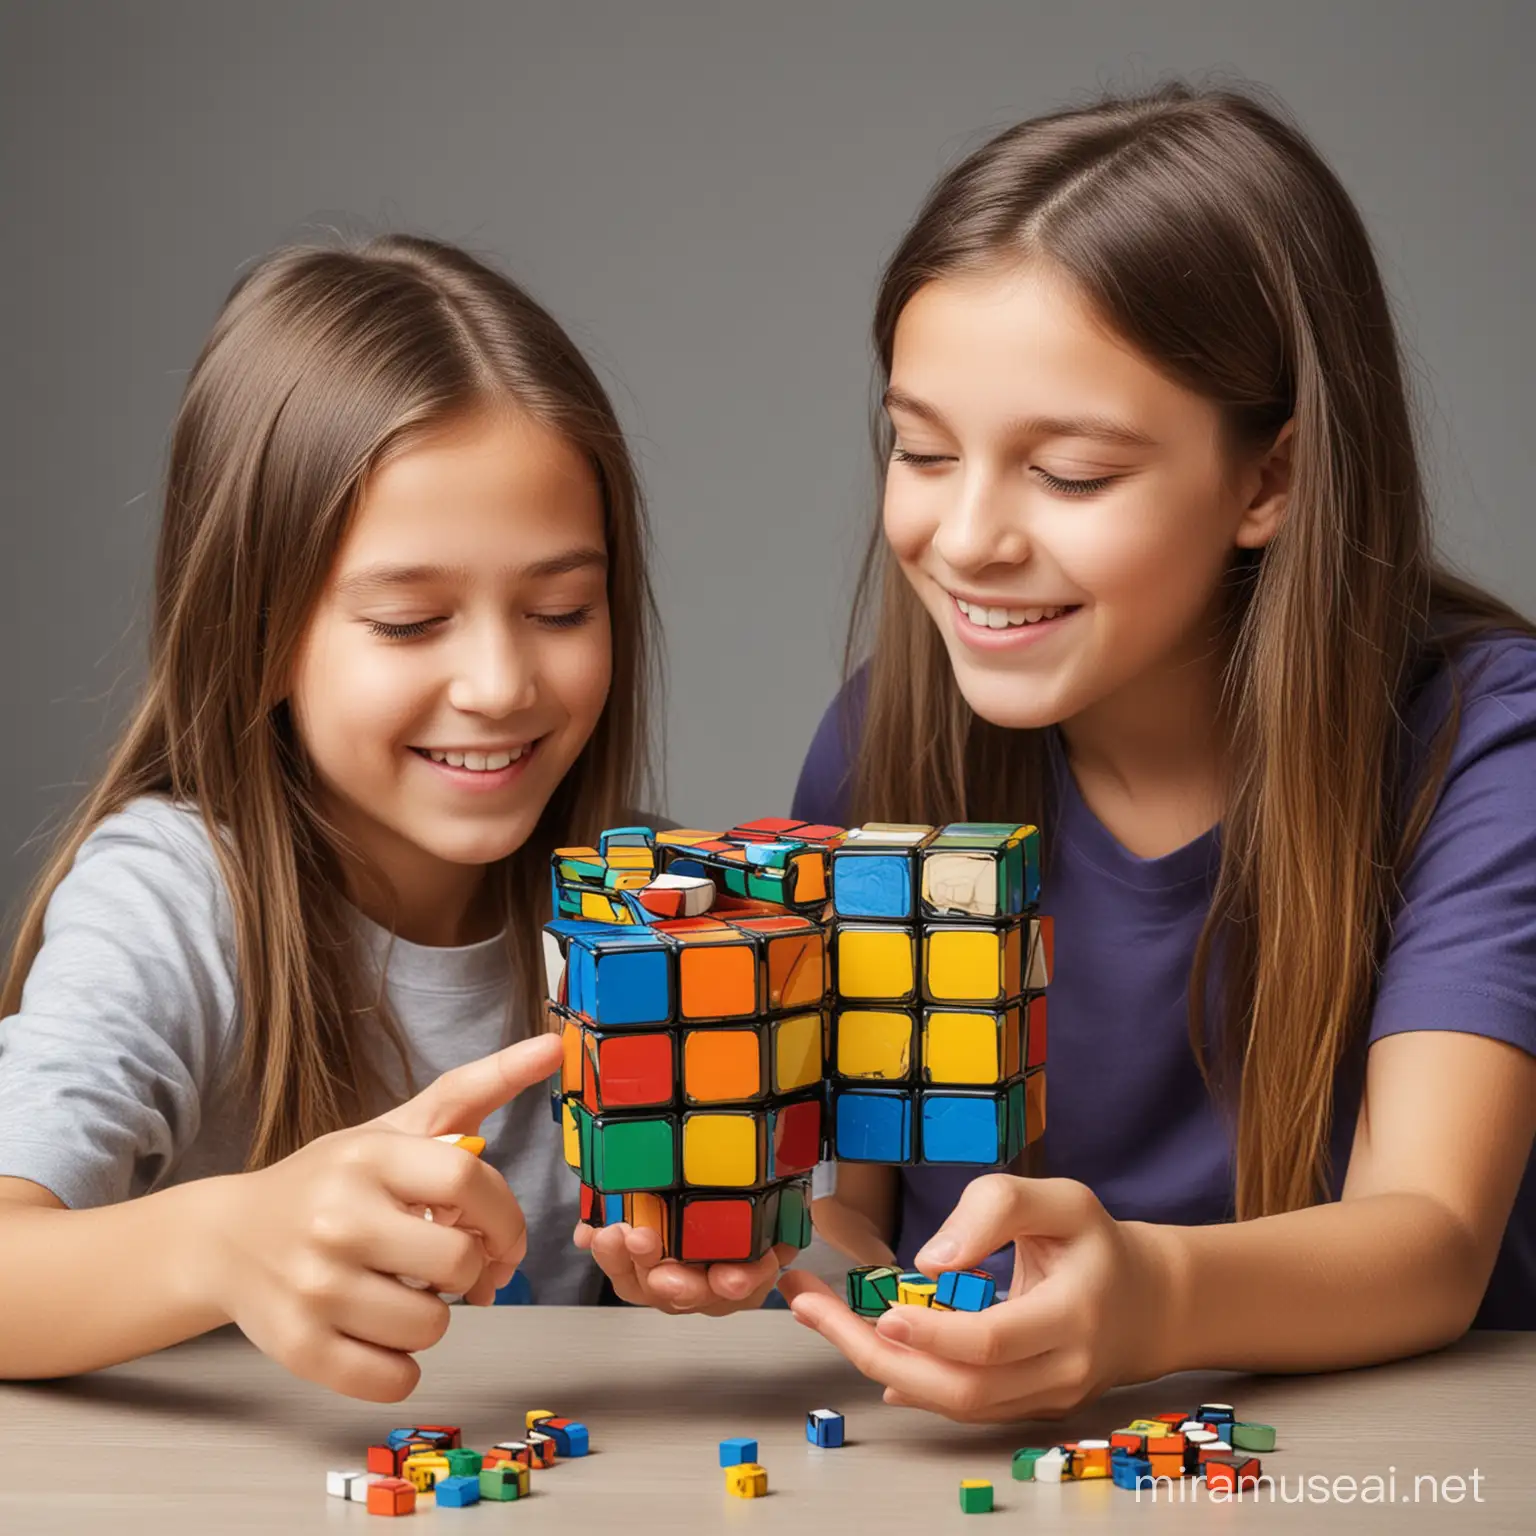 Design a flyer in which  2 girls and 1 boy solving rubik cubes while rotating in hand where students age between 6 to 14 years  